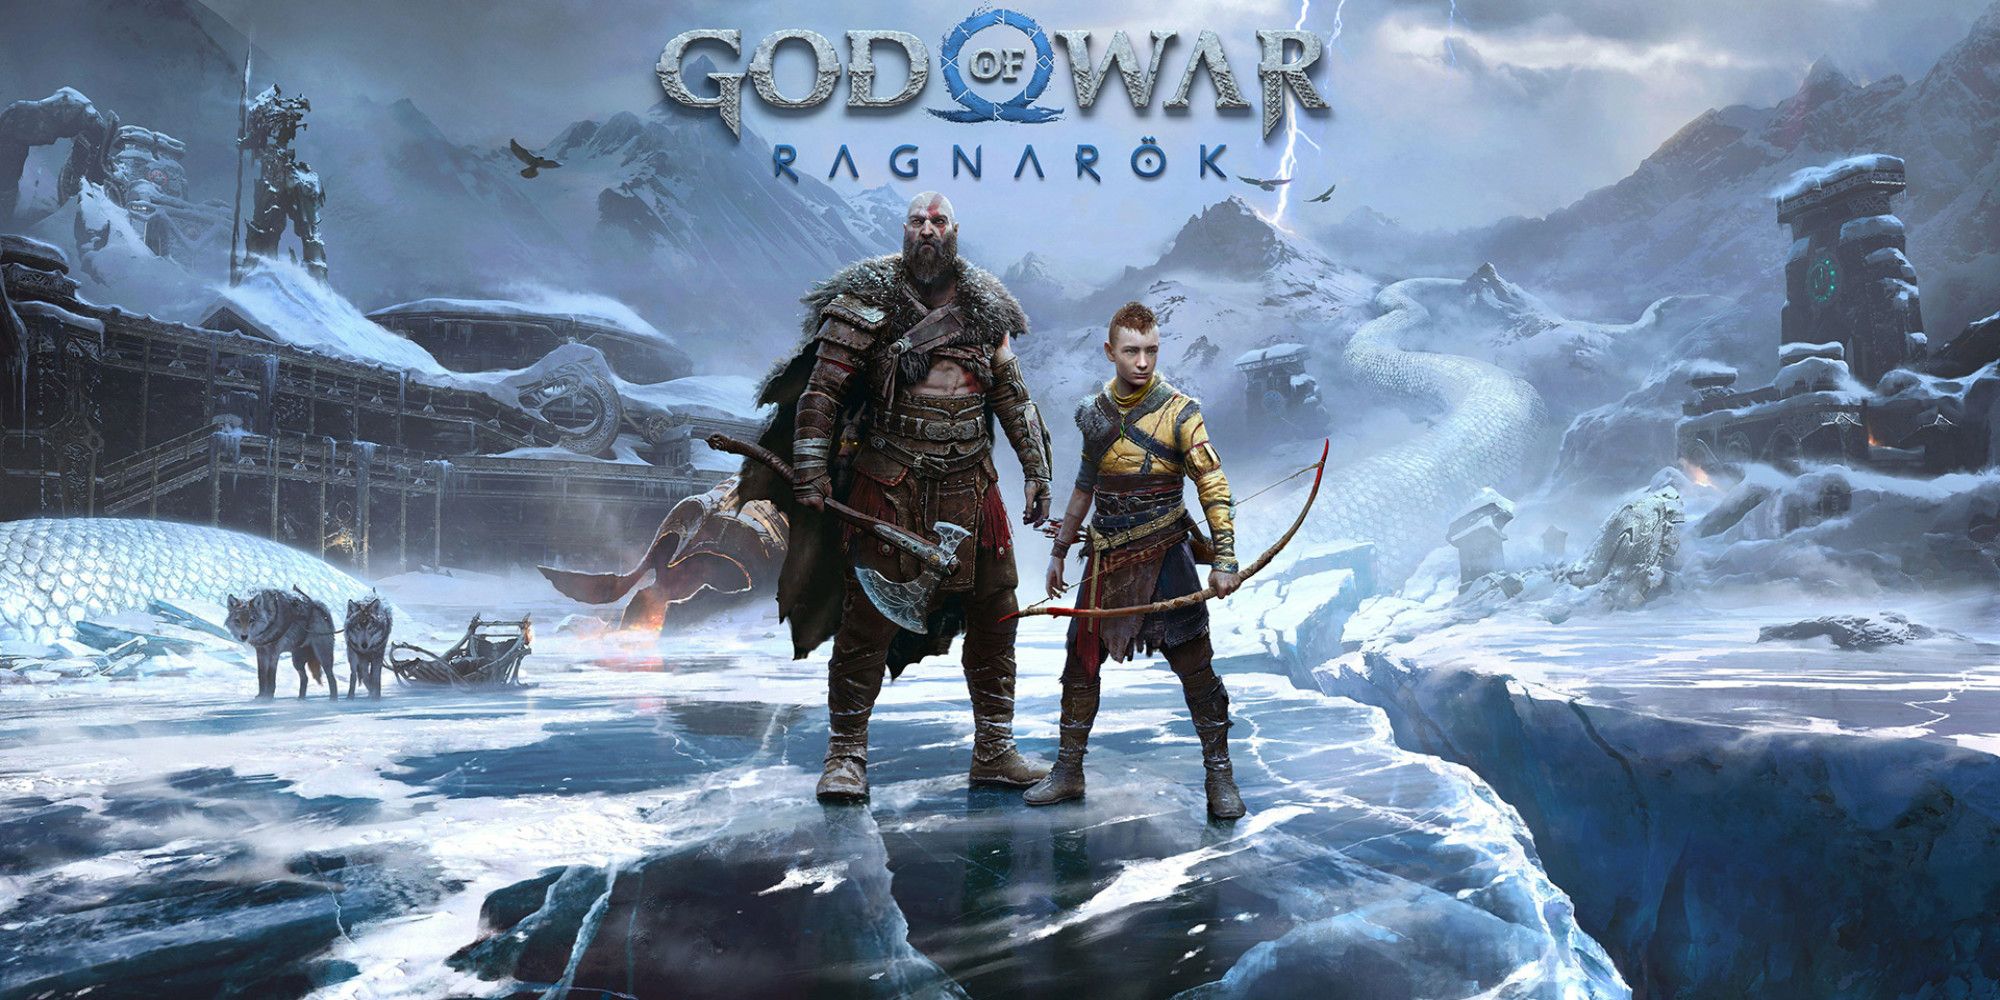 God of War Ragnarok feature image with Atreus and Kratos standing on an ice cap